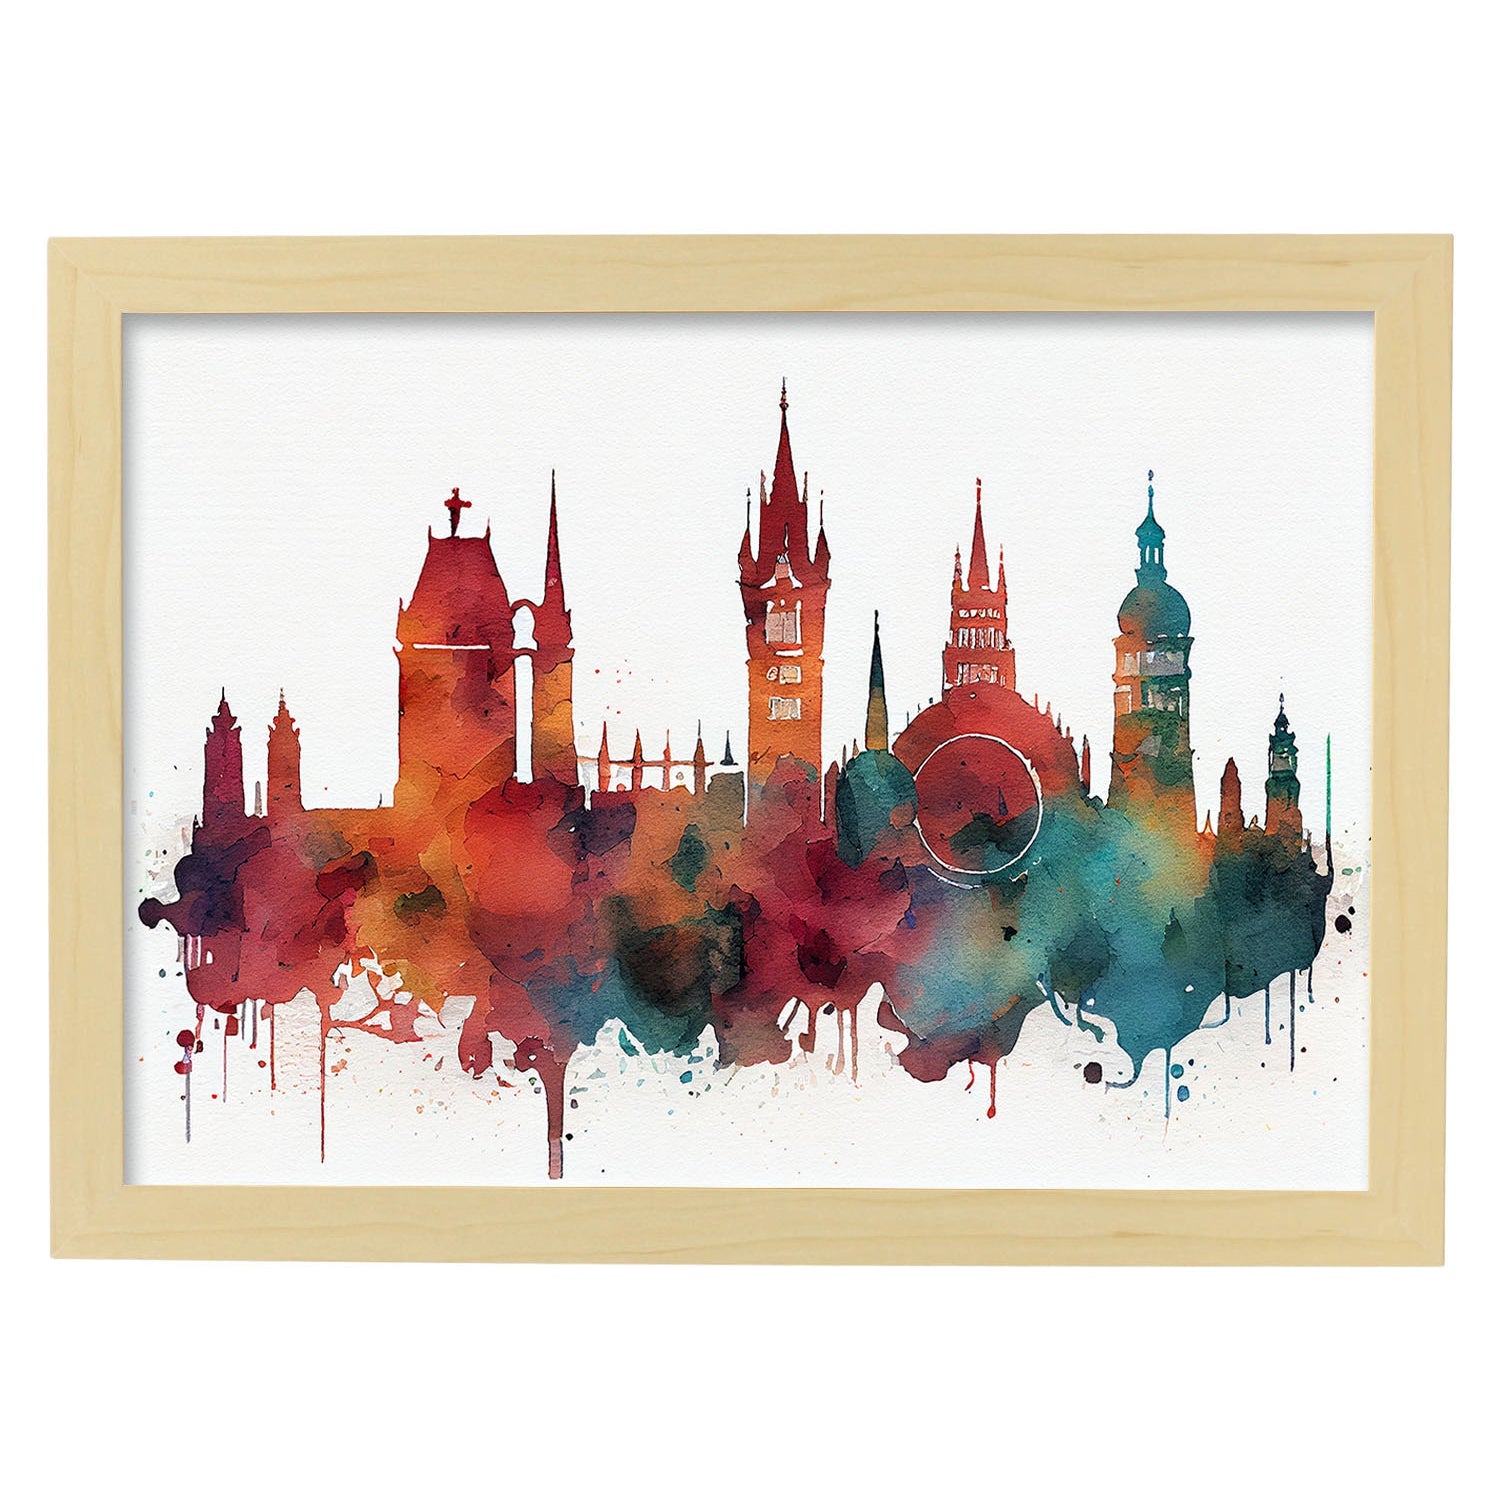 Nacnic watercolor of a skyline of the city of Munich. Aesthetic Wall Art Prints for Bedroom or Living Room Design.-Artwork-Nacnic-A4-Marco Madera Clara-Nacnic Estudio SL